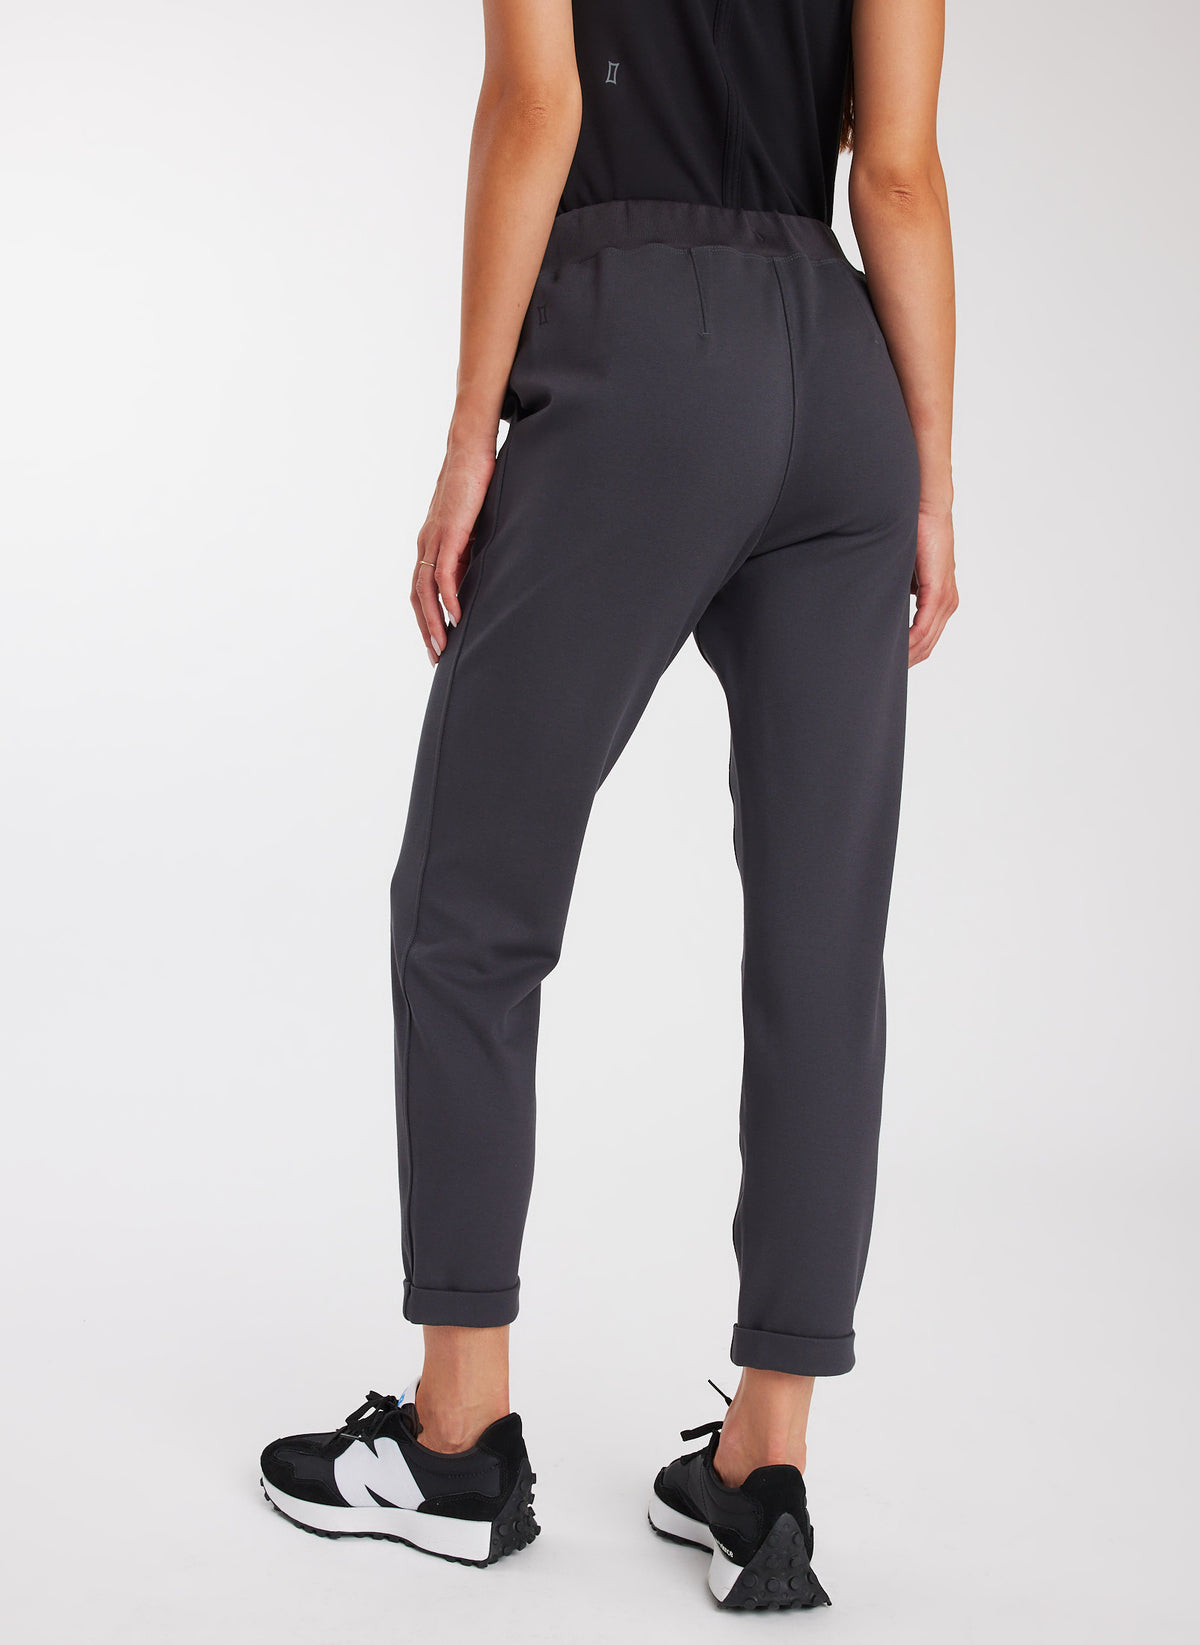 Serenity Slim Pants | Womens's Pant – Kit and Ace